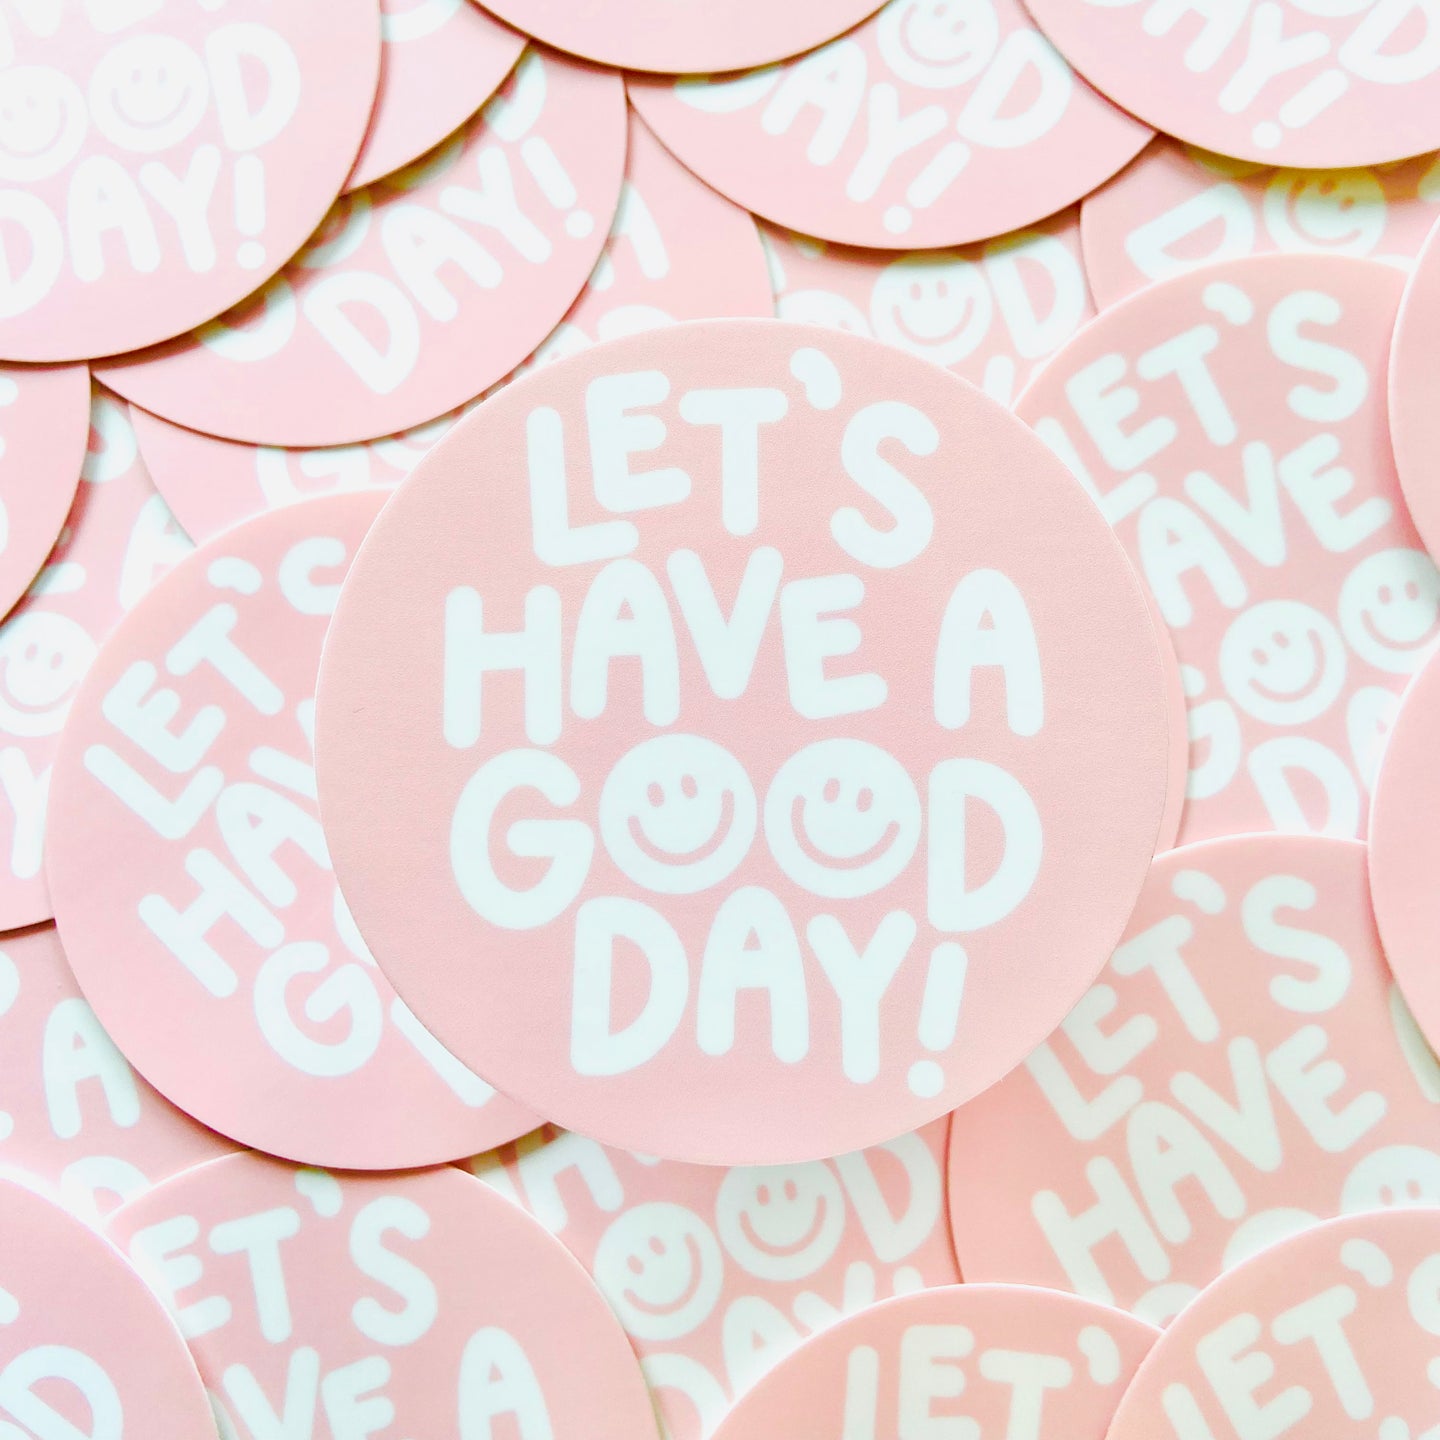 Have A Good Day - Sticker